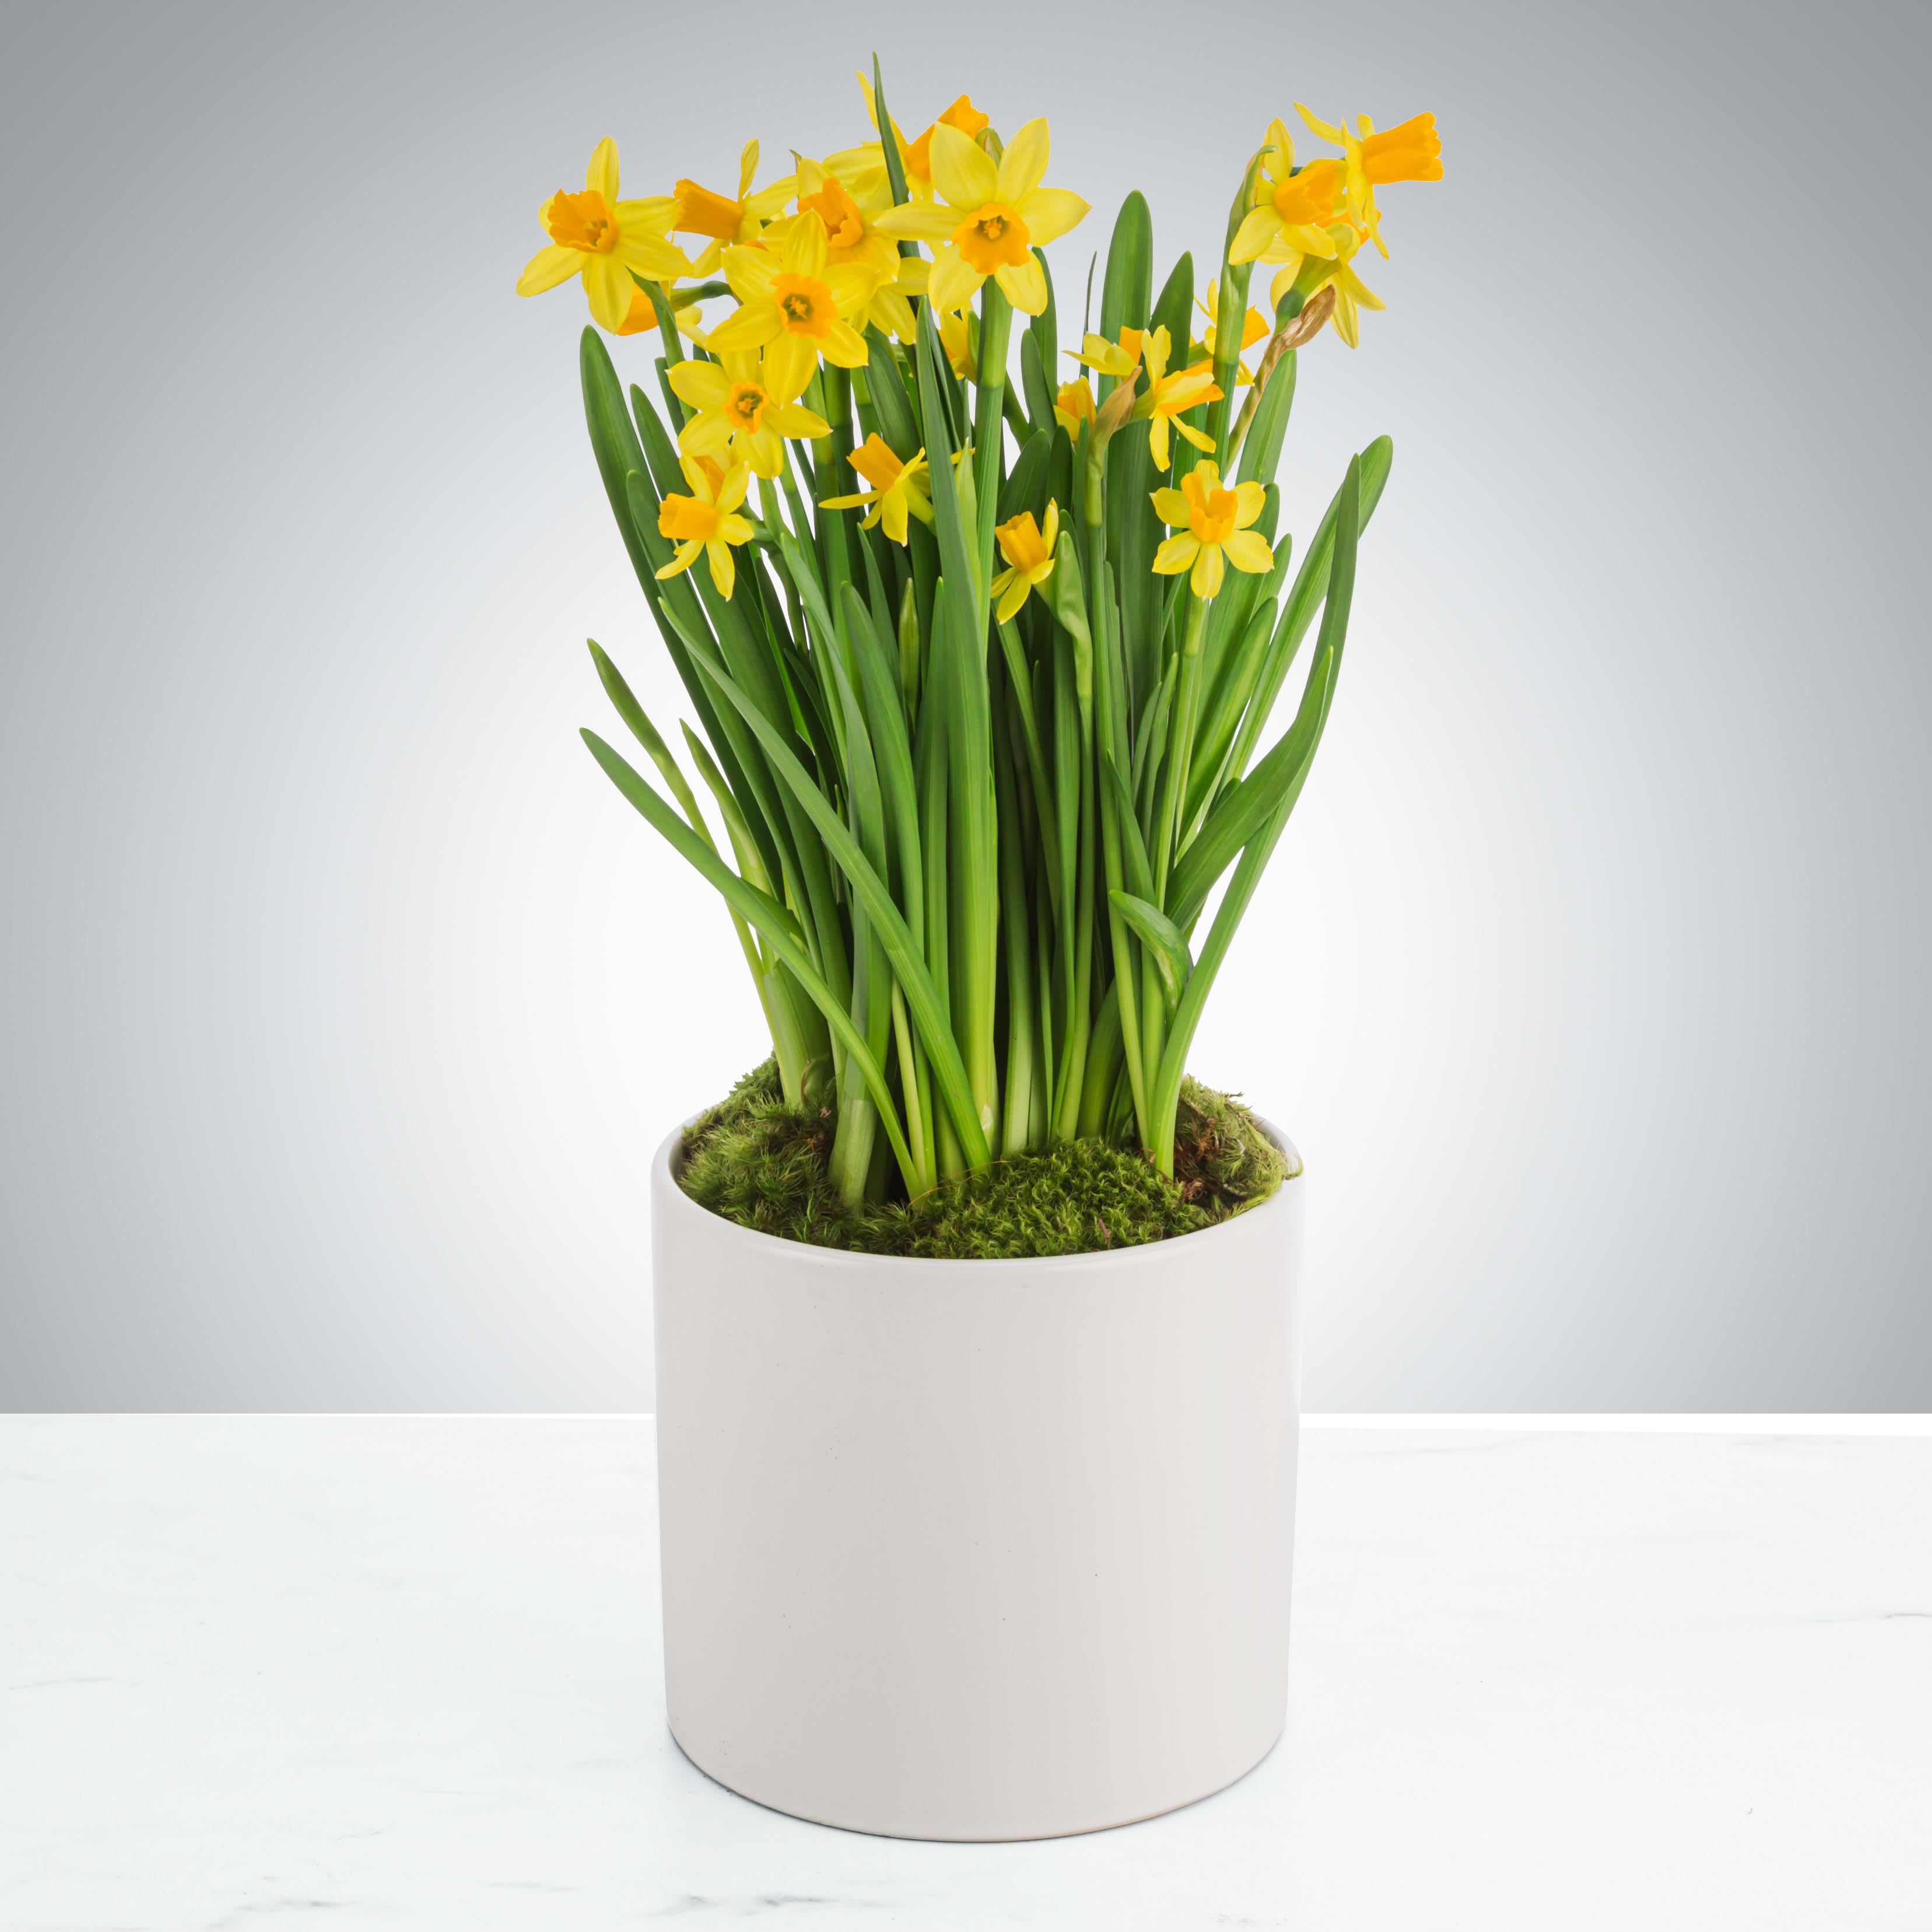 Daffodil Plant  - The perfect spring gift! Lift someone's spirits with this cheerful potted flower. Daffodils symbolize rebirth and new beginnings so send it to make somebody's day. It also is the official flower of March so send it for somebody's birthday flower!